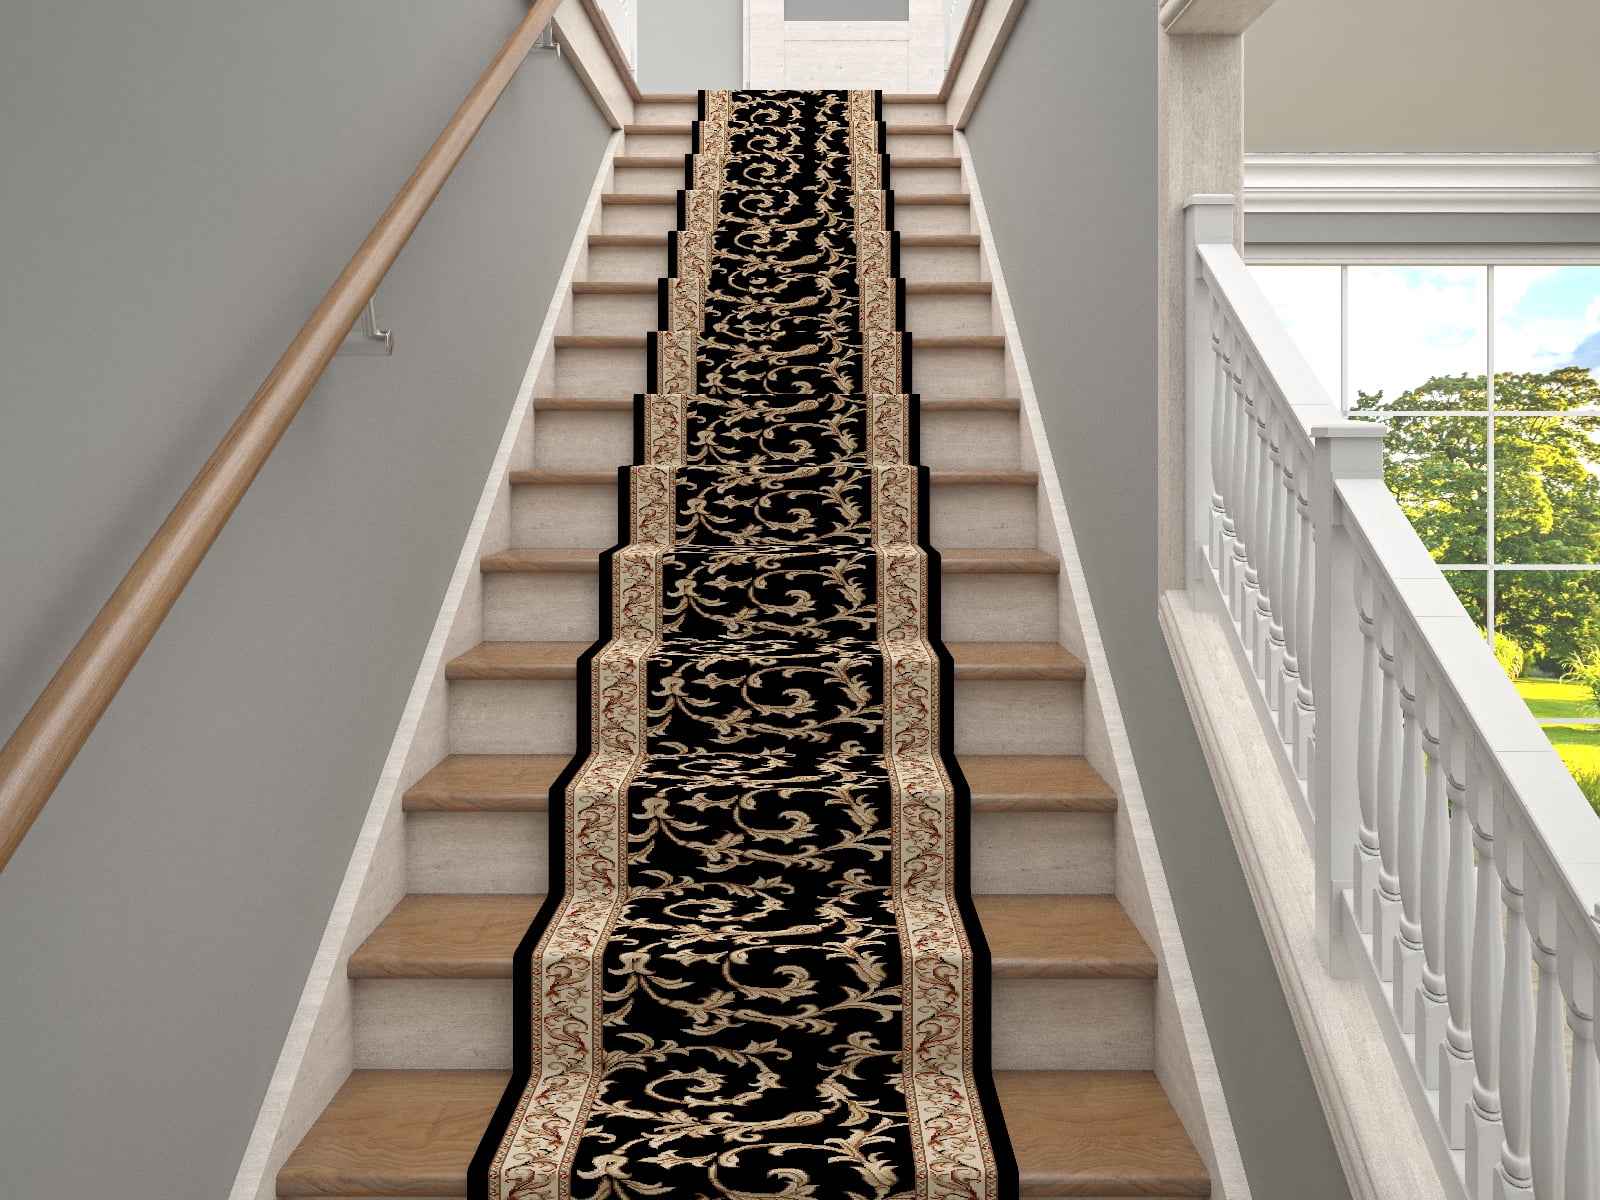 Black Marash Luxury Collection 25 Stair Runner Rugs Stair Carpet Runner with 336,000 Points of Fabric Per Square Meter